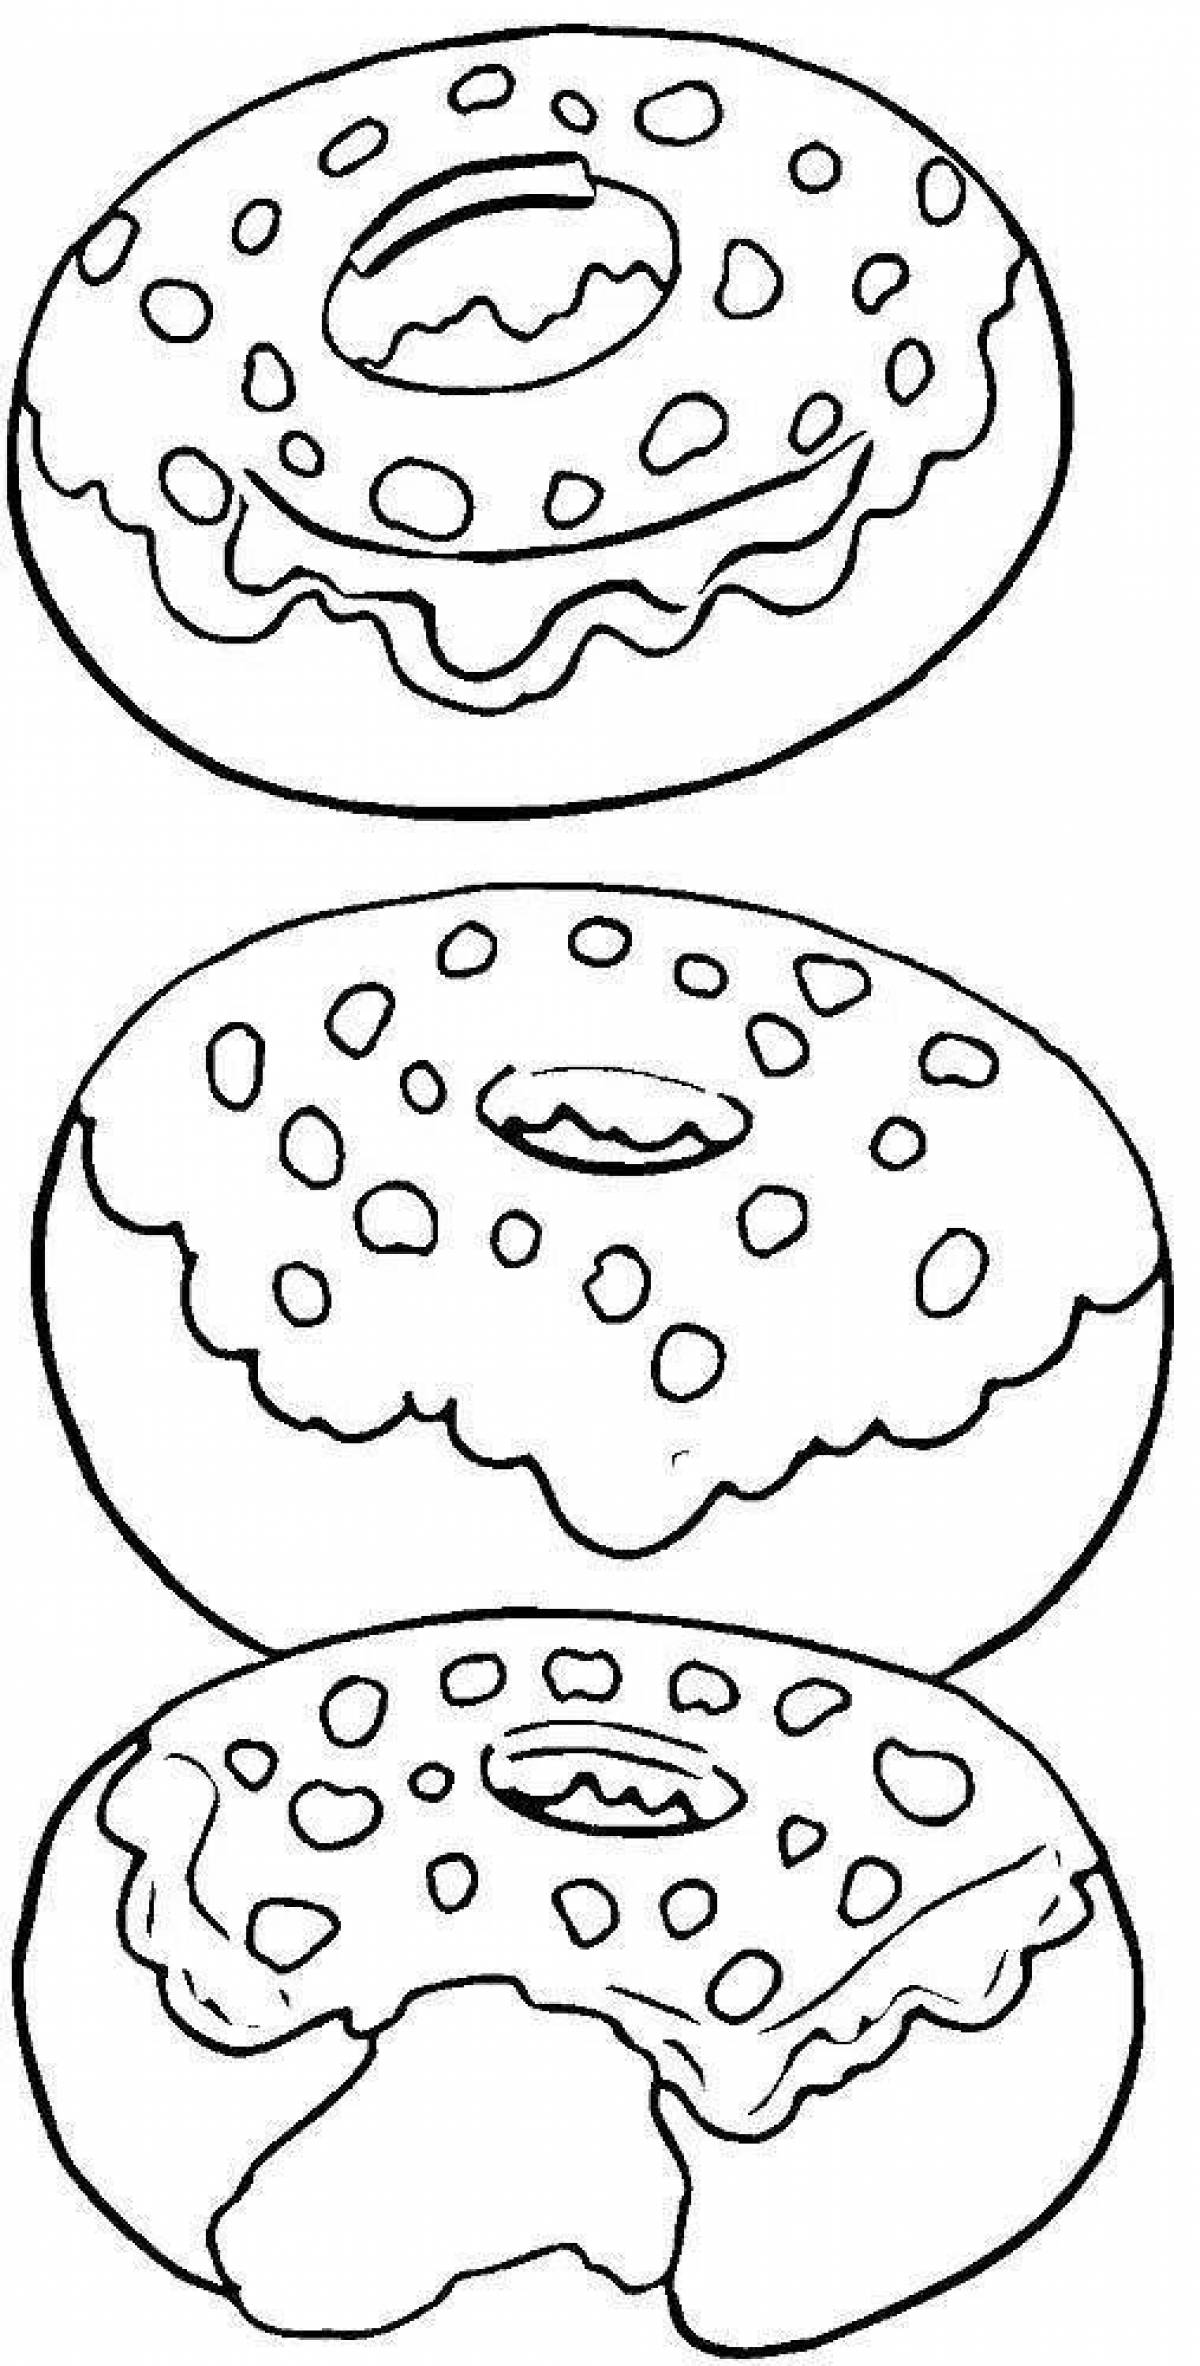 Fun coloring of donuts for kids